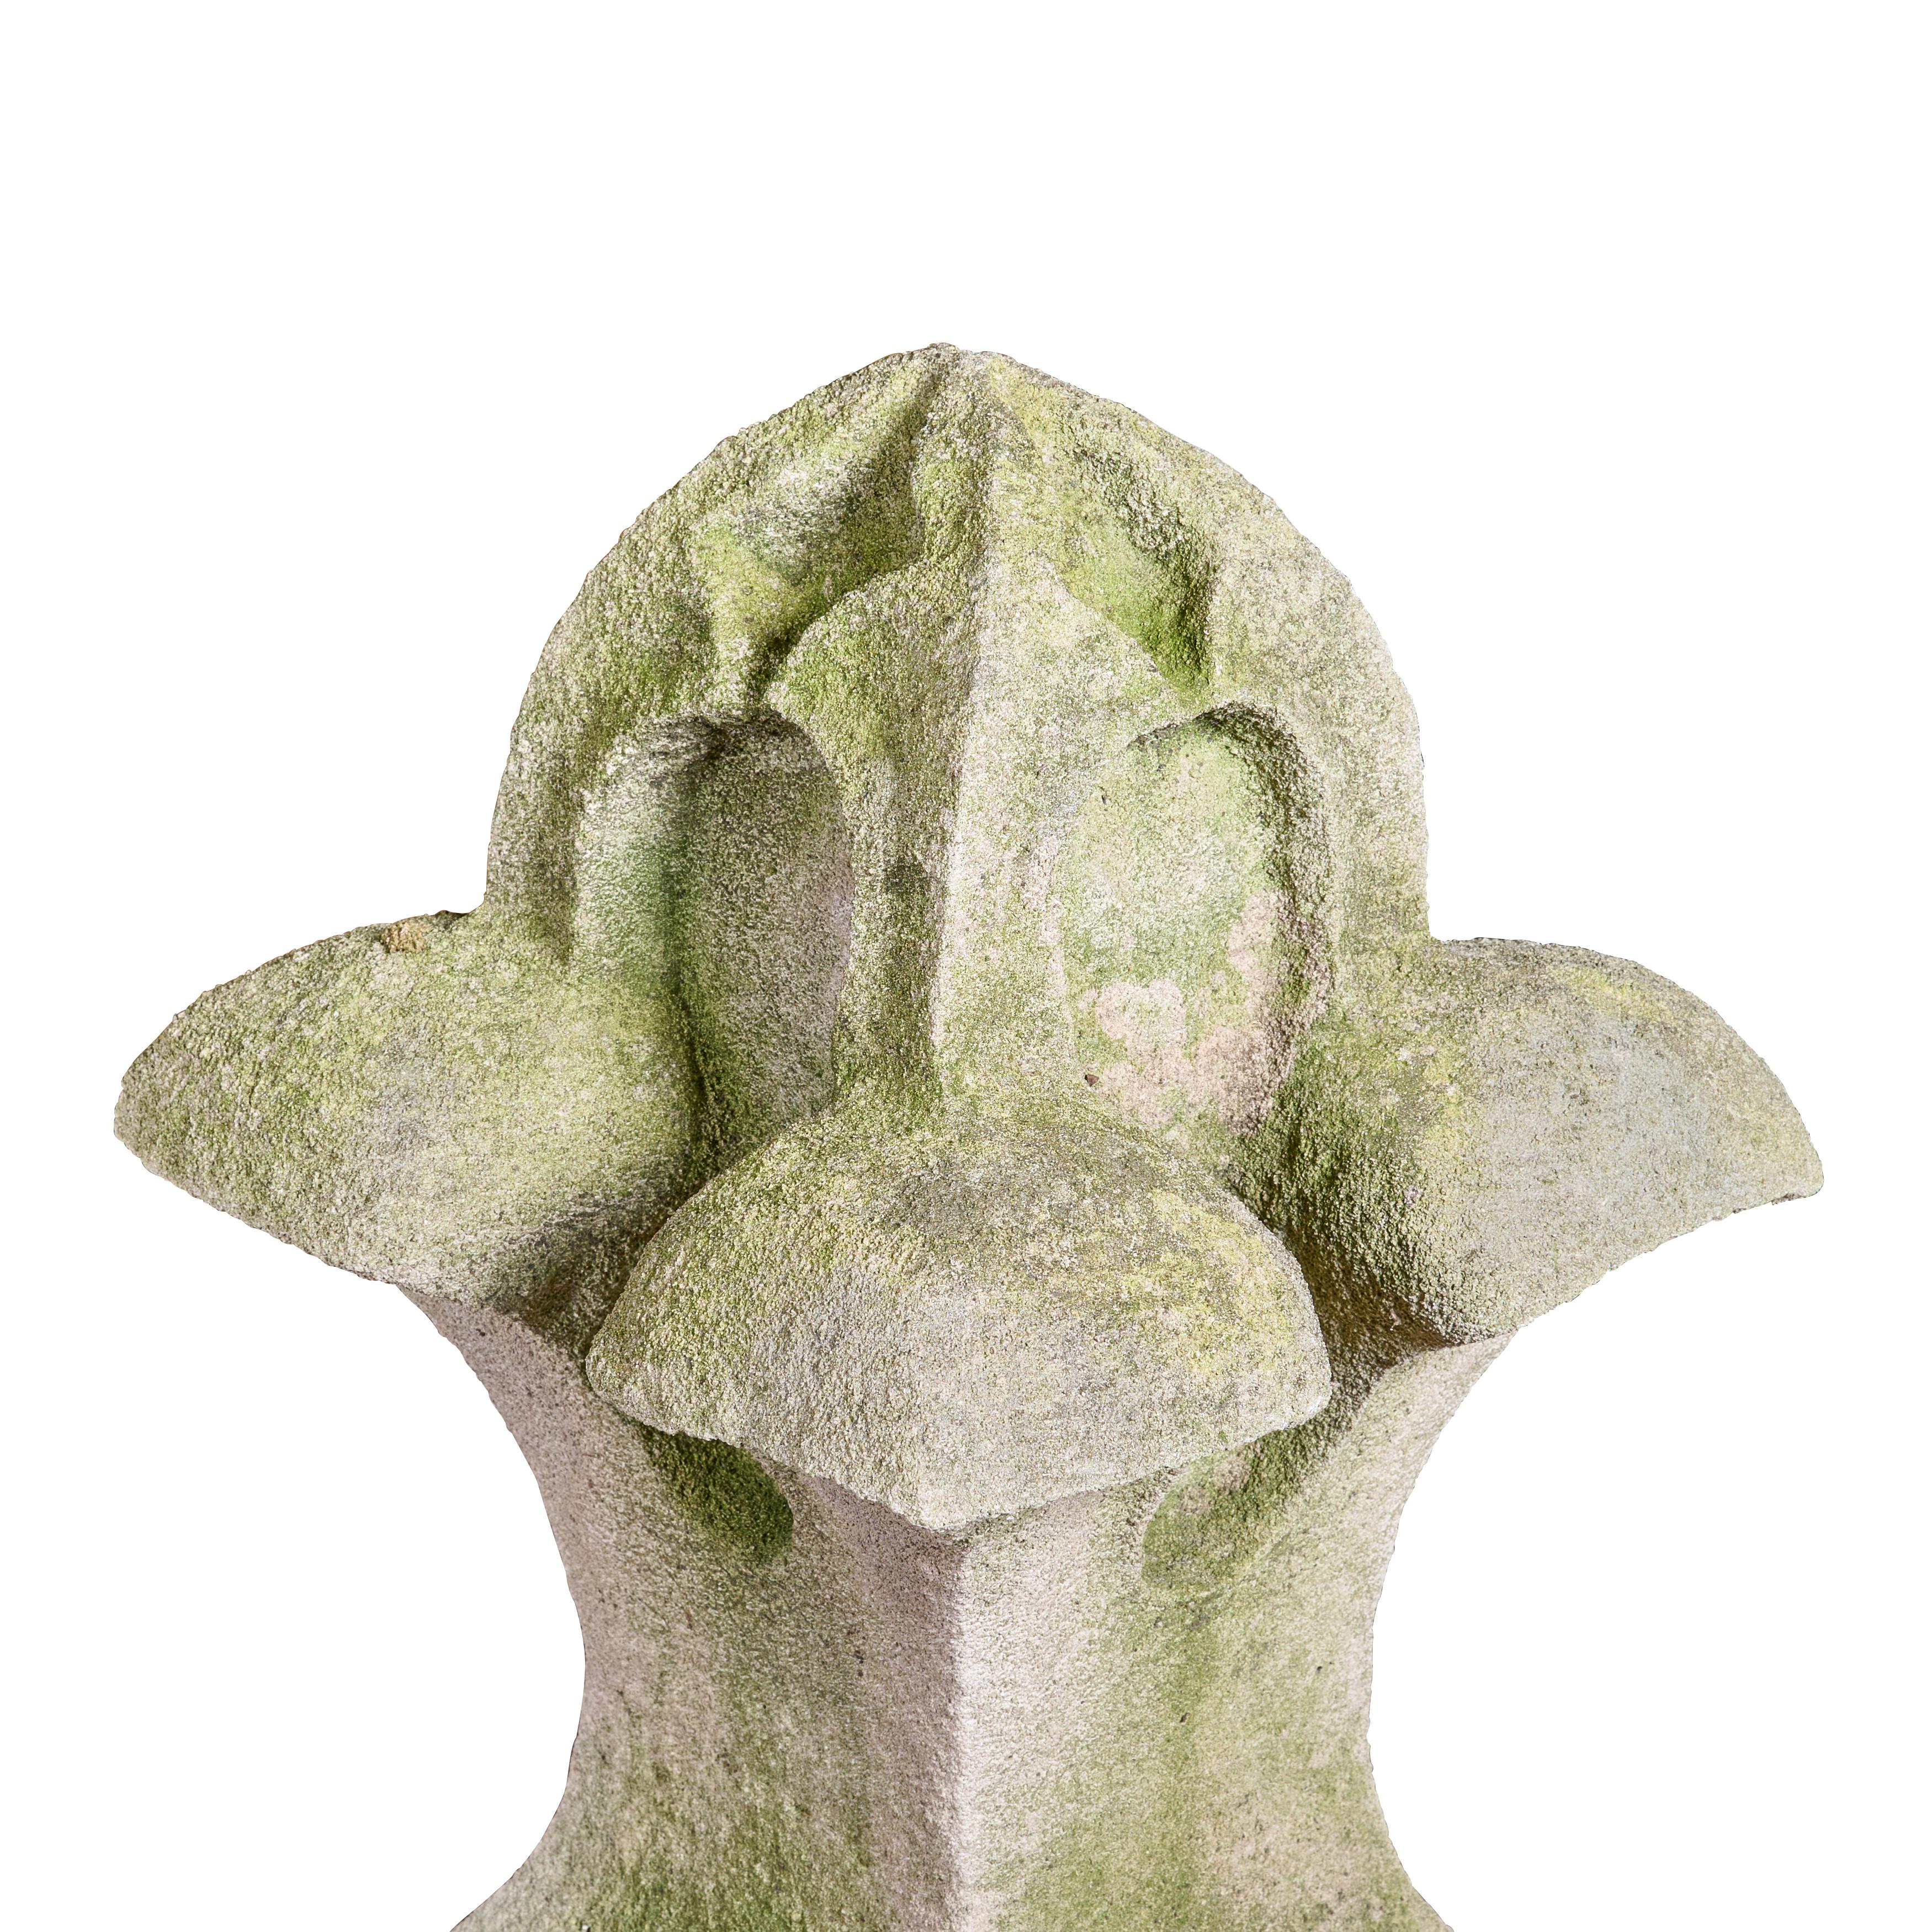 American Carved Limestone Rooftop Finial